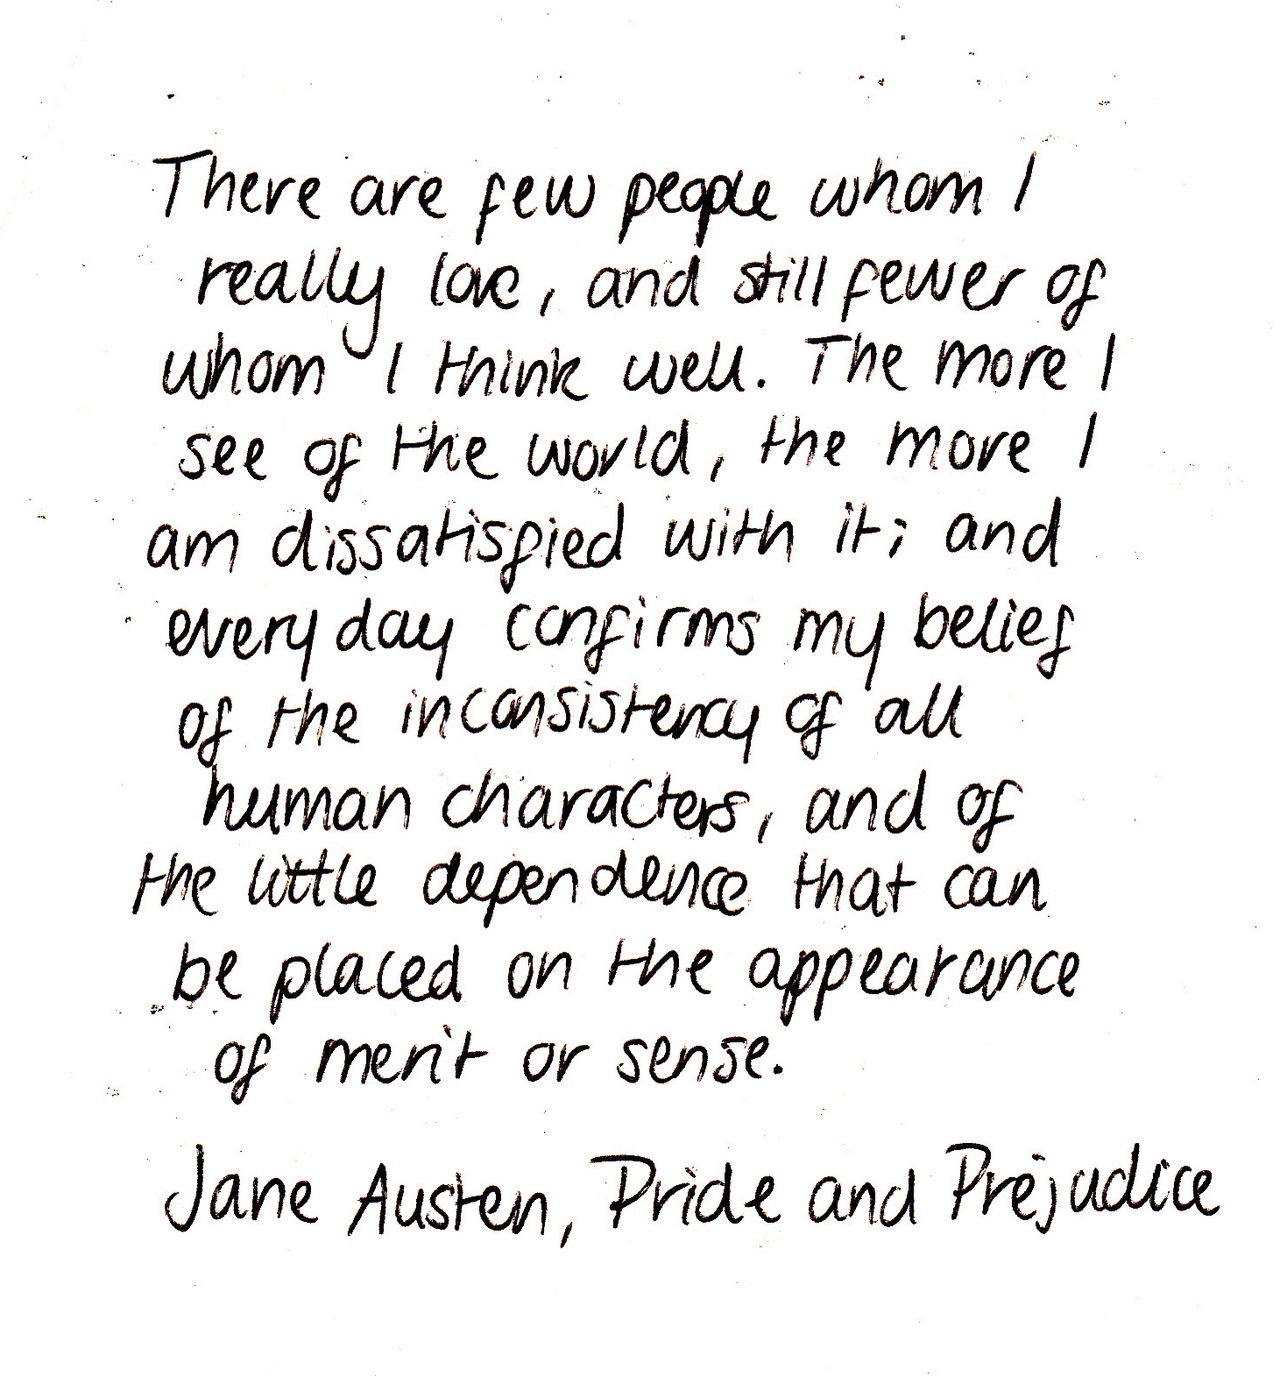 There are few people whom I really love and still fewer of whom I think well. The more I see of the world, the more am I dissatisfied with it; and every day … Jane Austen